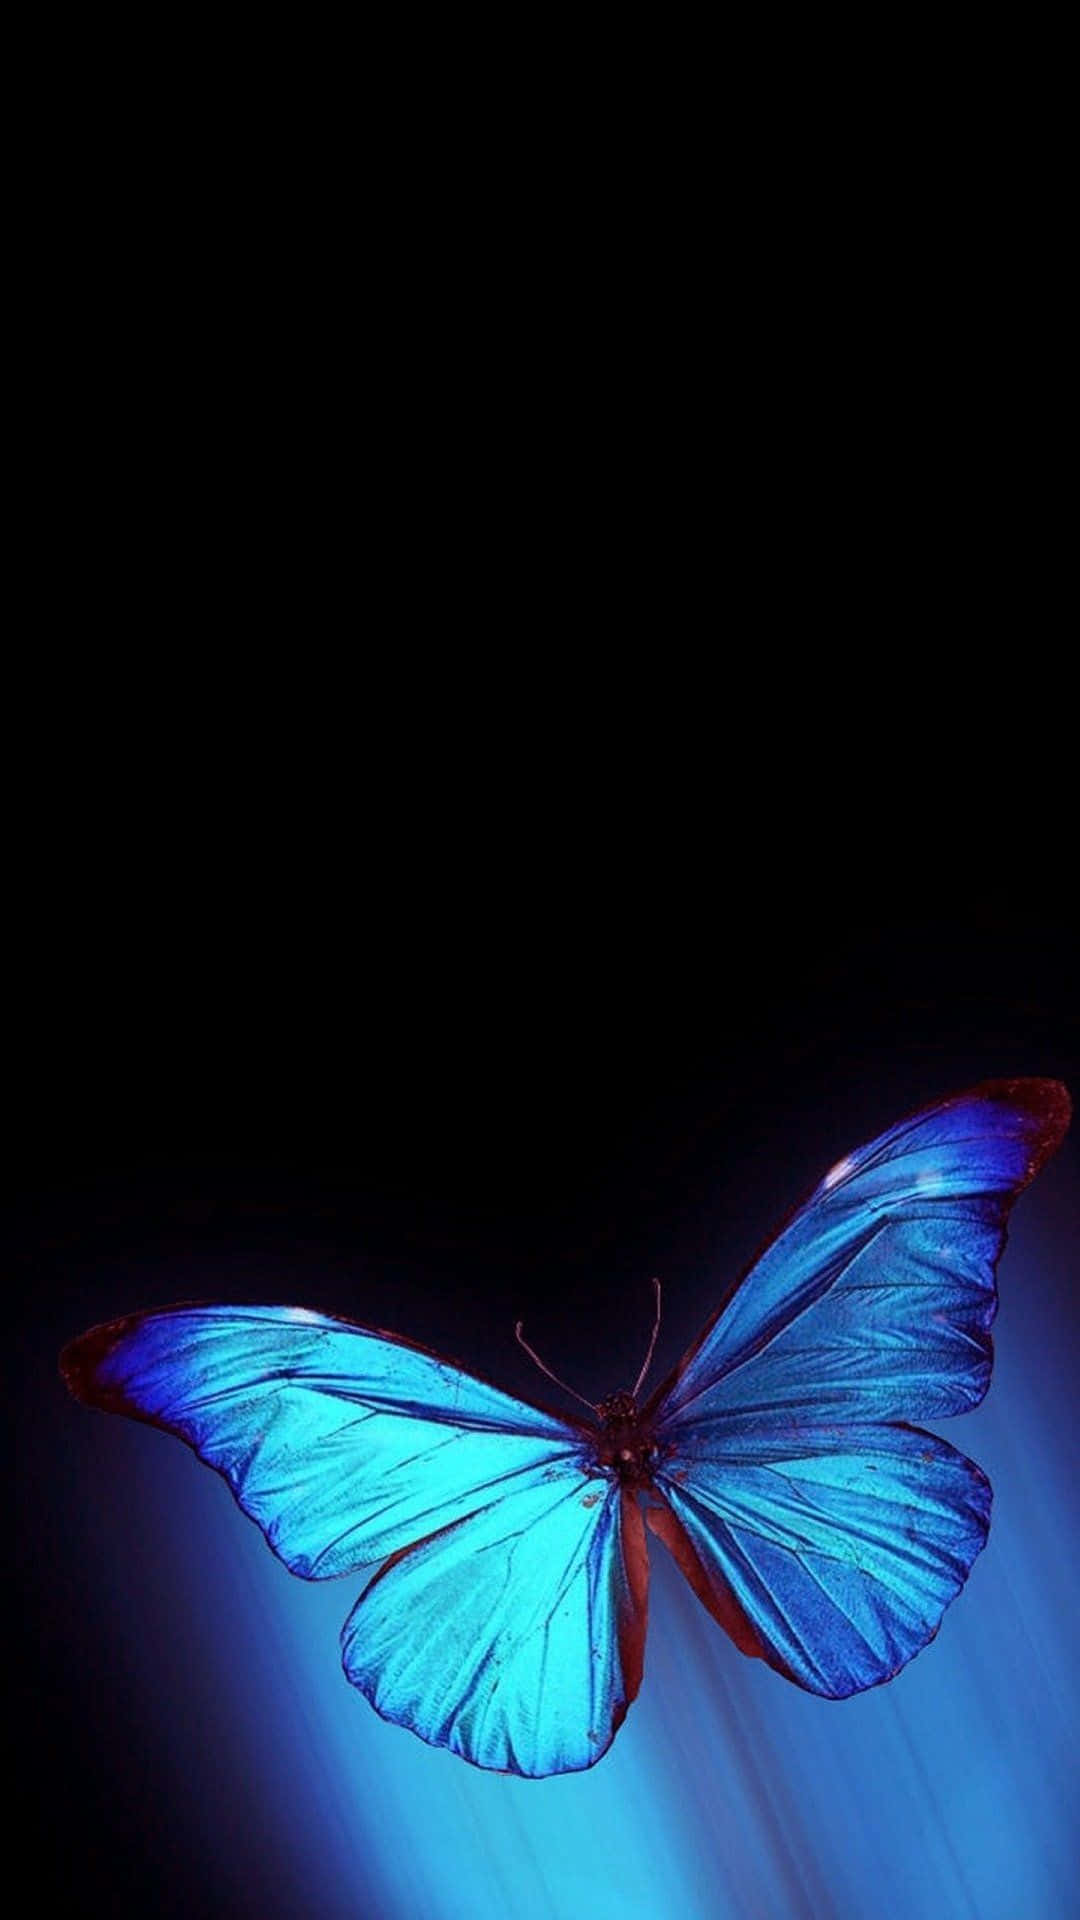 A bright blue butterfly glimmering in the sunlight